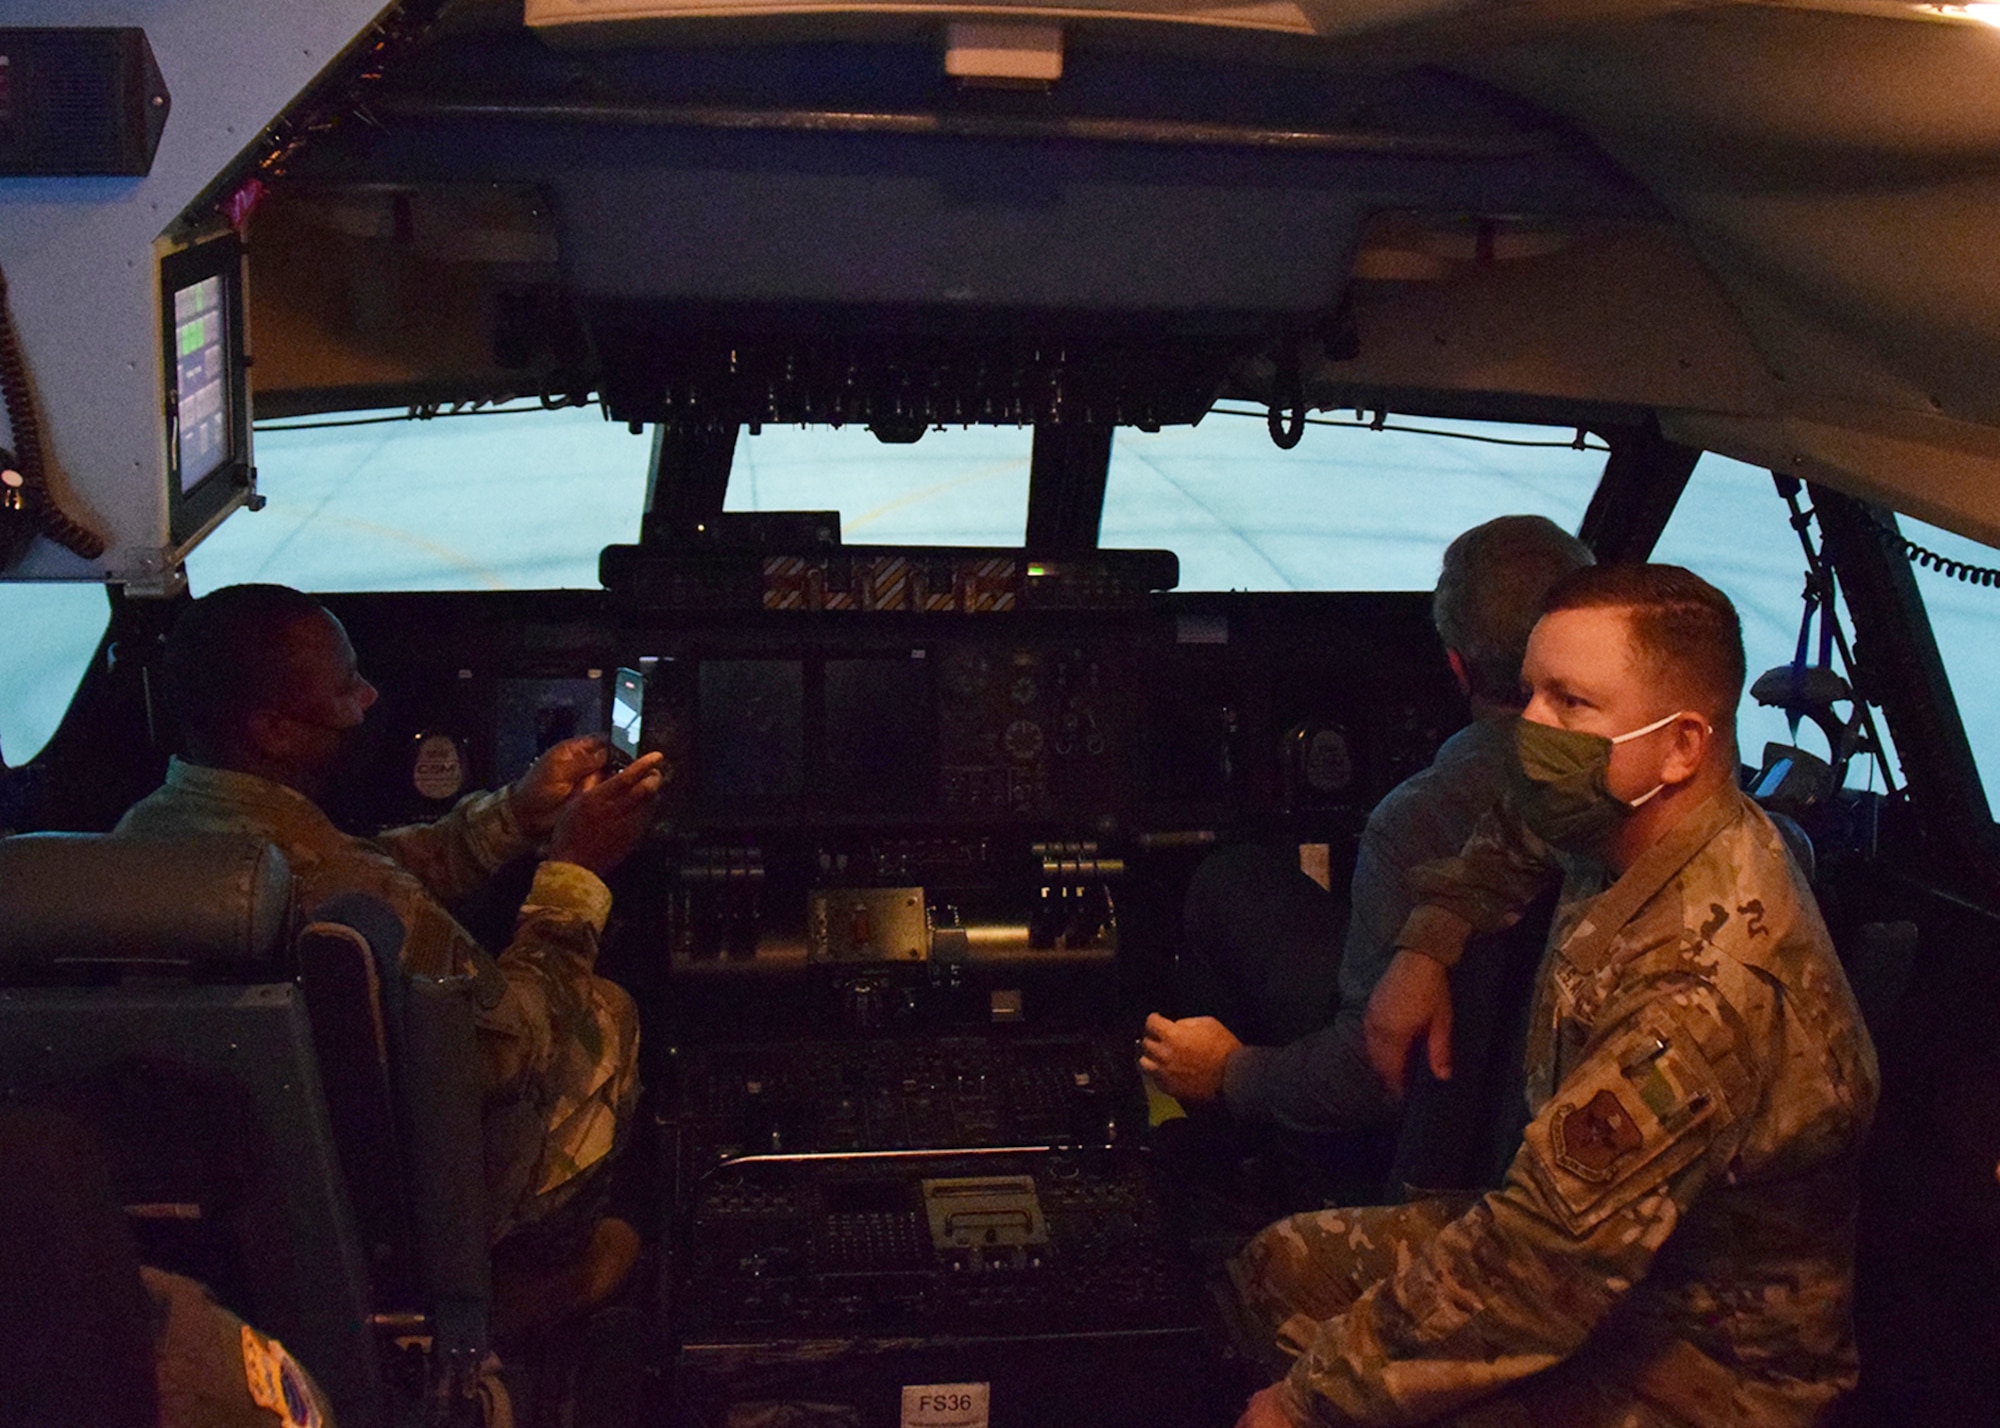 Chief Master Sgt. Carey S. Jordan, 502nd Installation Support Group command chief, Mark J. Tharp, 502nd ISG technical director, and Col. Steven A. Strain, 502nd ISG commander, tour the C-5M Super Galaxy flight simulator at the 433rd Airlift Wing’s flight training facility Oct. 21, 2020 at Joint Base San Antonio-Lackland, Texas. (U.S. Air Force photo by Iram Carmona)